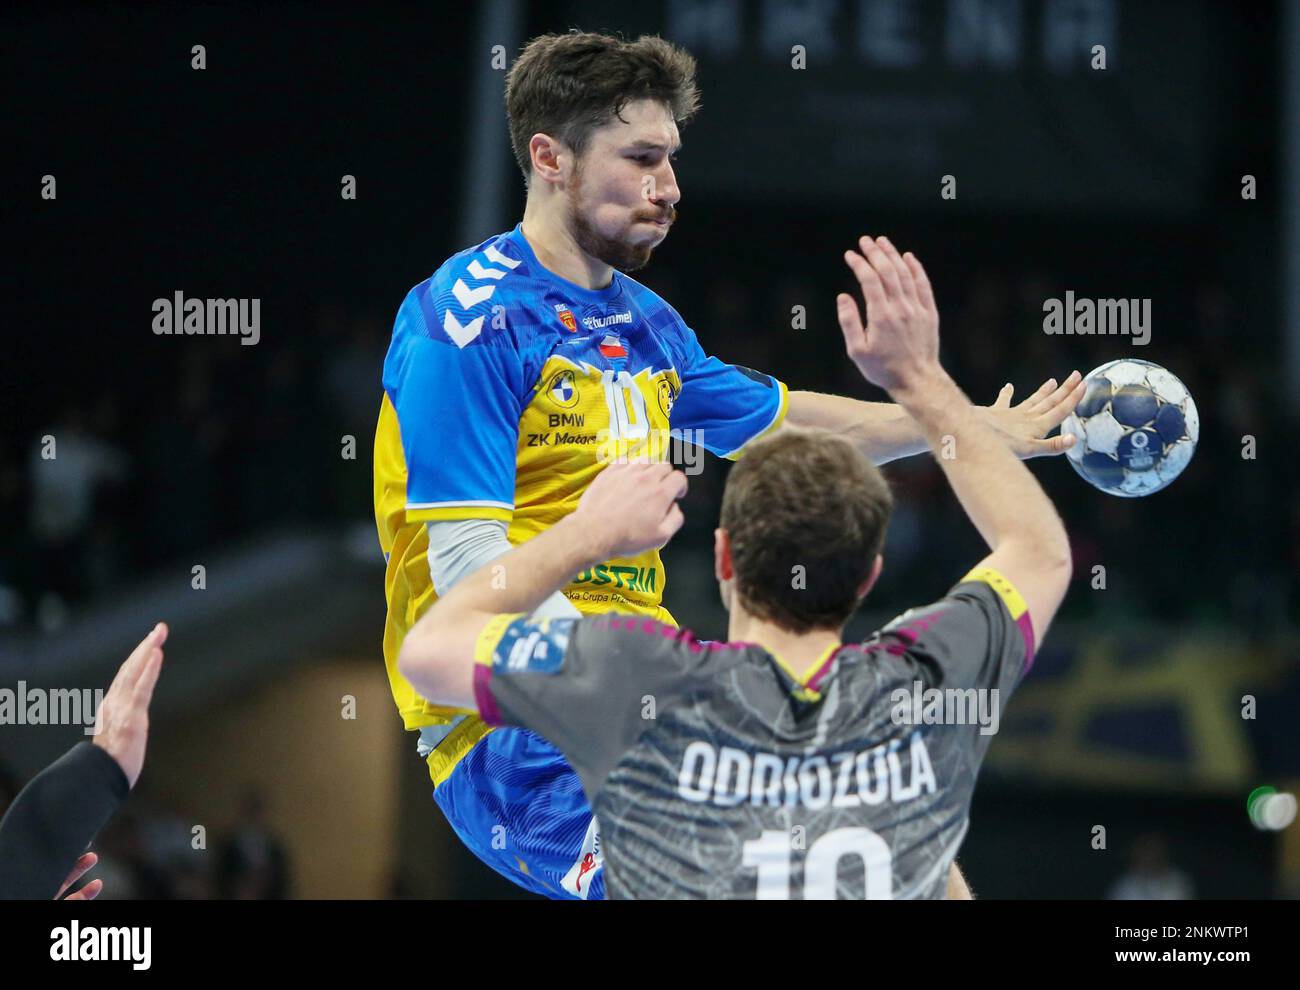 February 23, 2023, Rome, France: Alex Dujshebaev of Kielce during the EHF  Champions League Handball match between HBC Nantes and Lomza Vive Kielce on  February 23, 2023 at H Arena in Nantes,